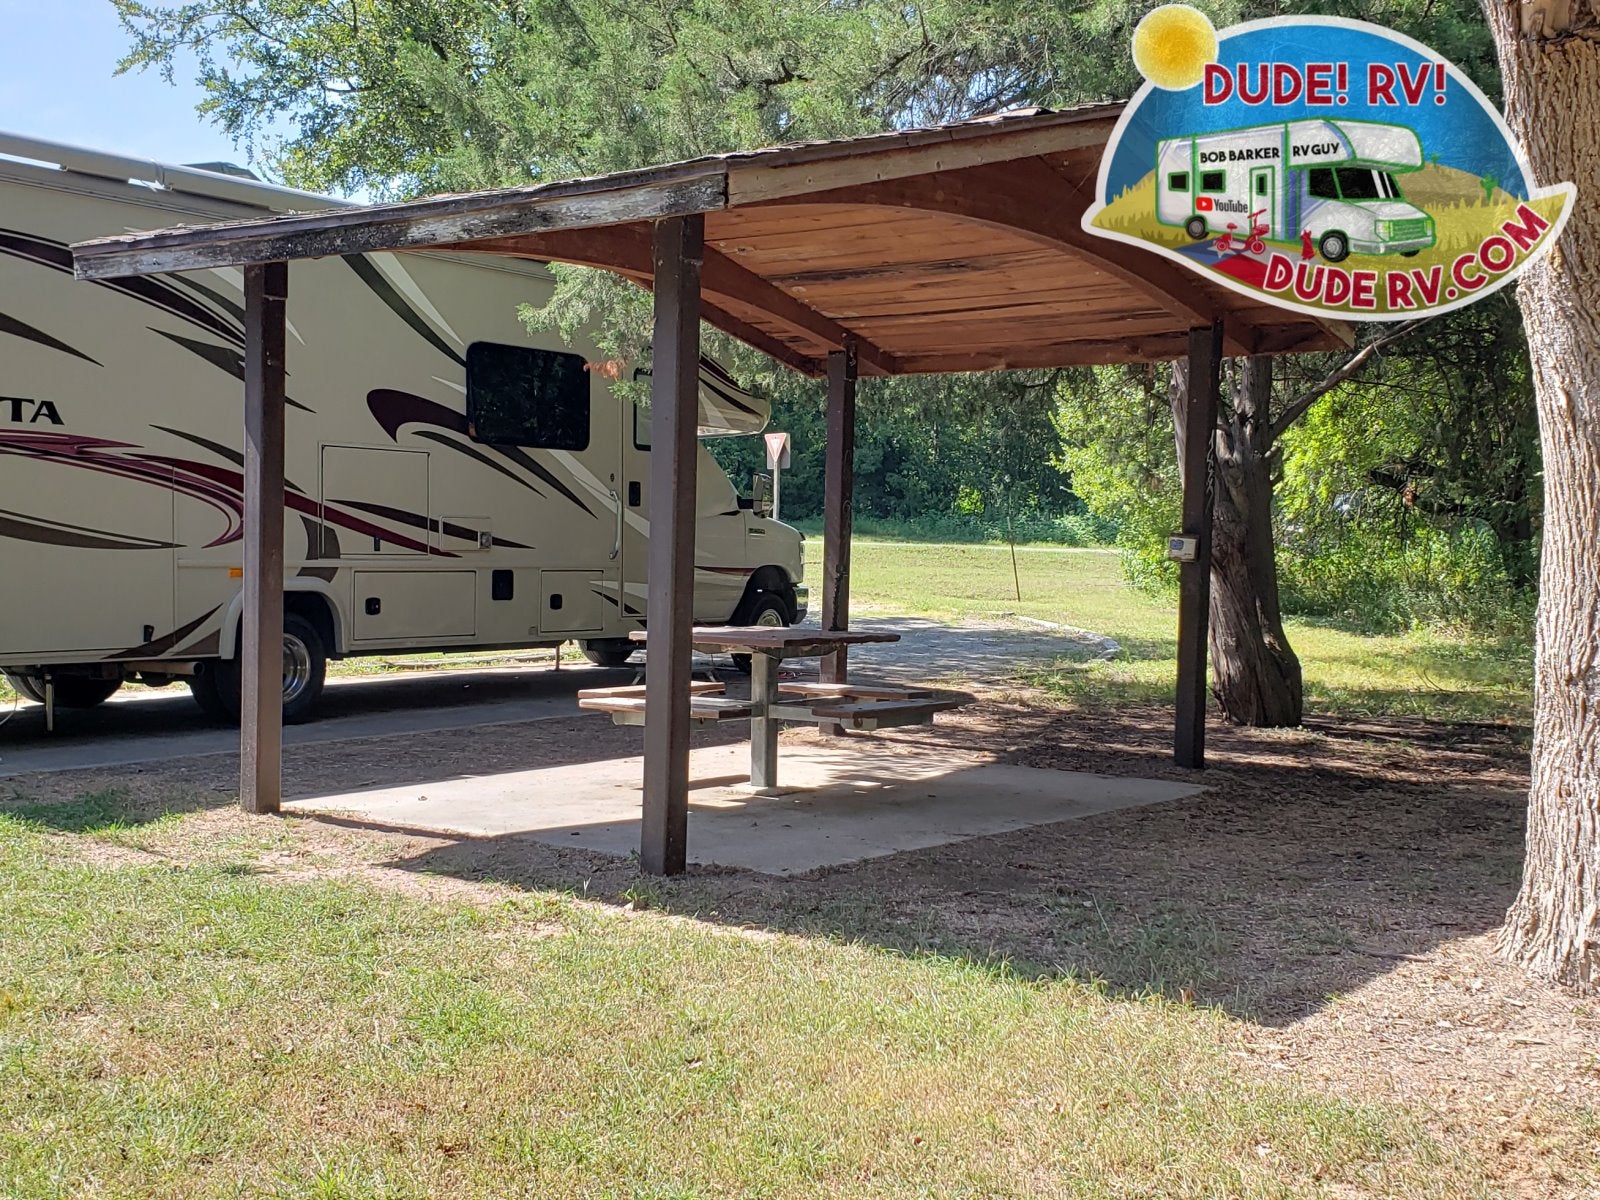 Camper submitted image from Waxahachie Creek Park - 4